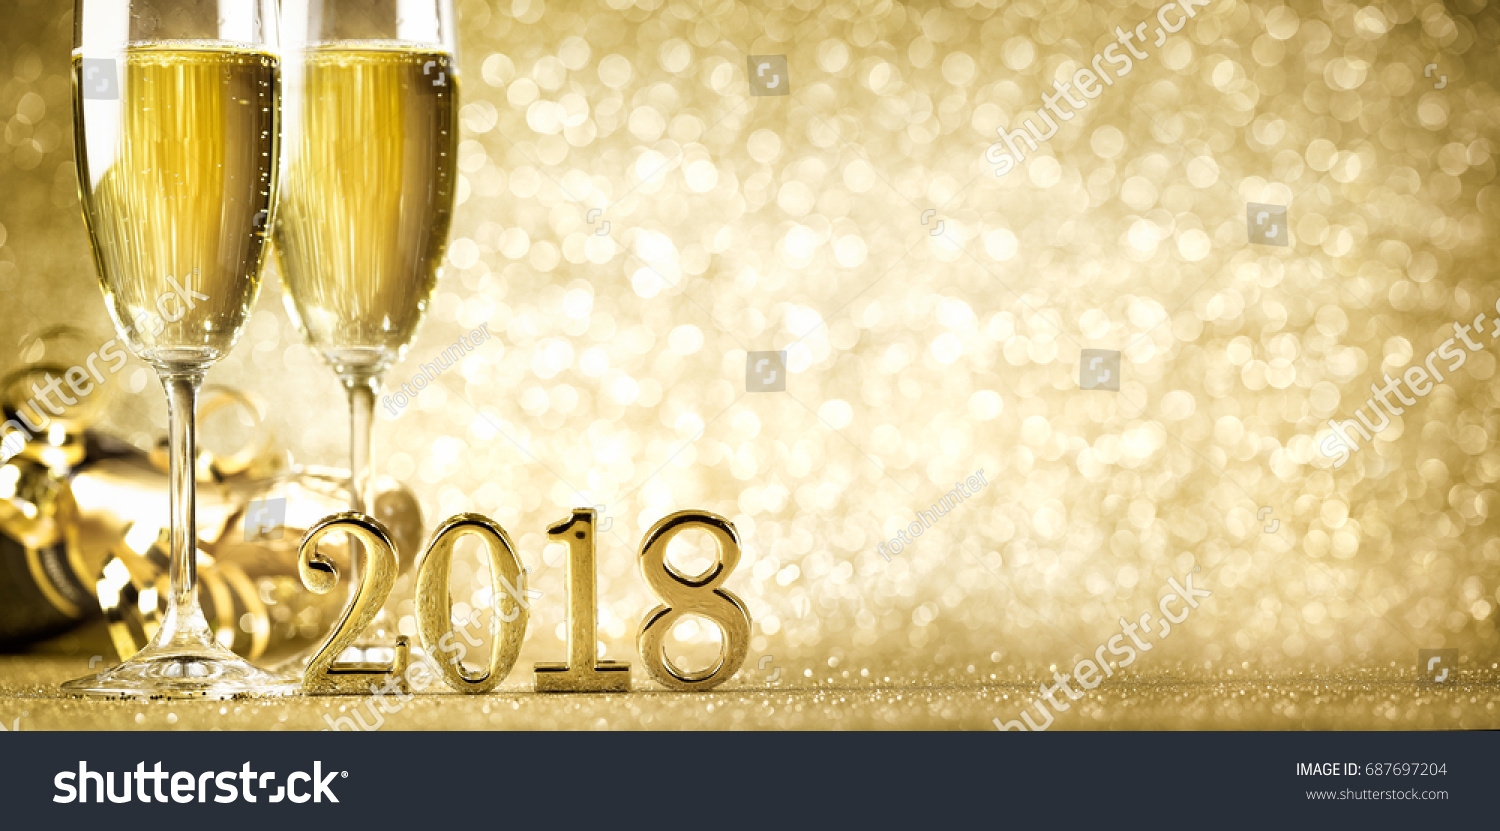 New years eve celebration background with champagne #687697204